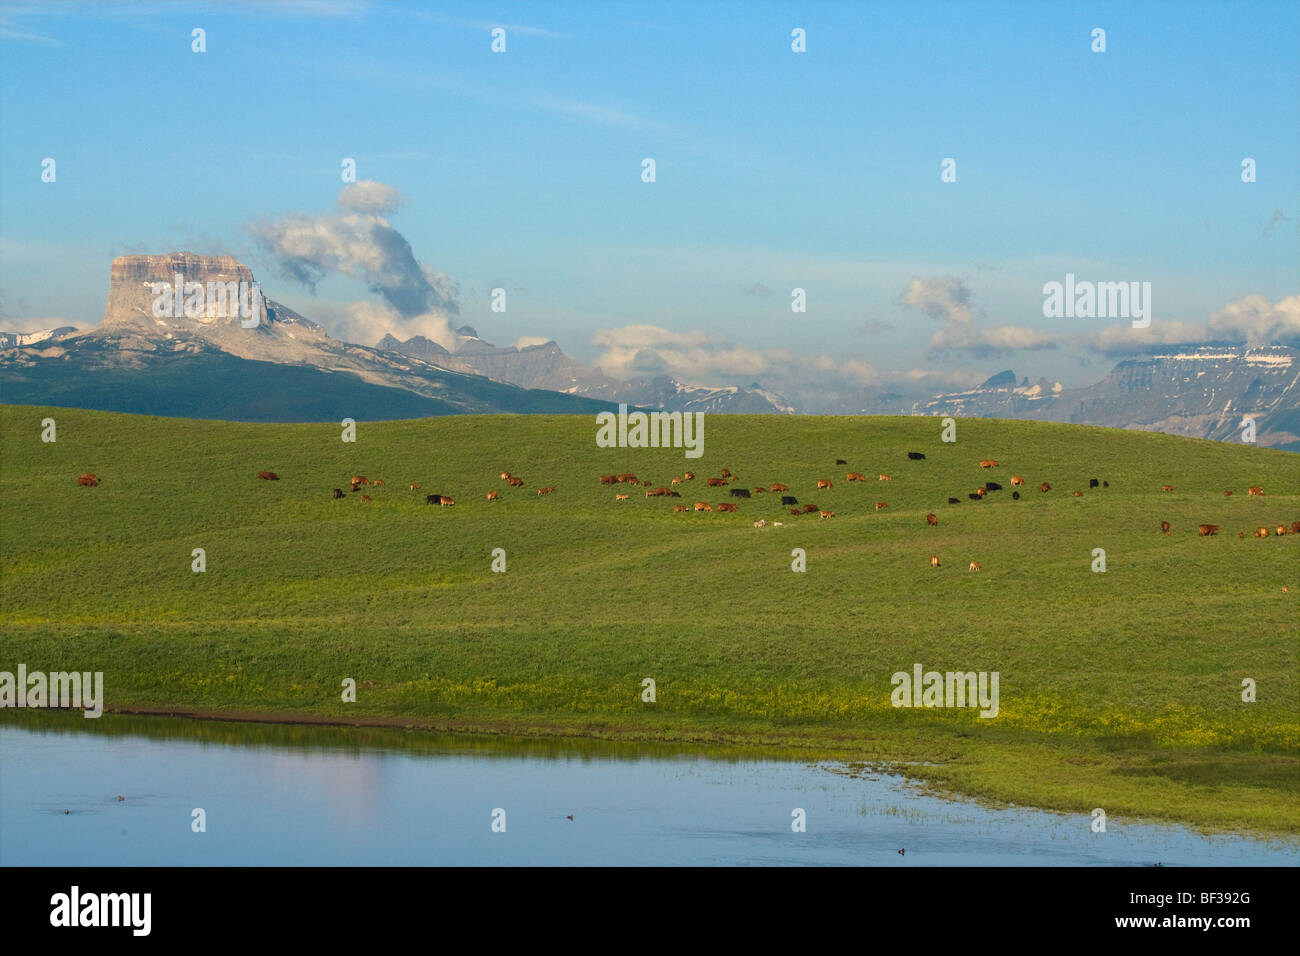 Mixed breed cows and calves grazing on a green foothill pasture with the Canadian Rockies in the background / Alberta, Canada. Stock Photo